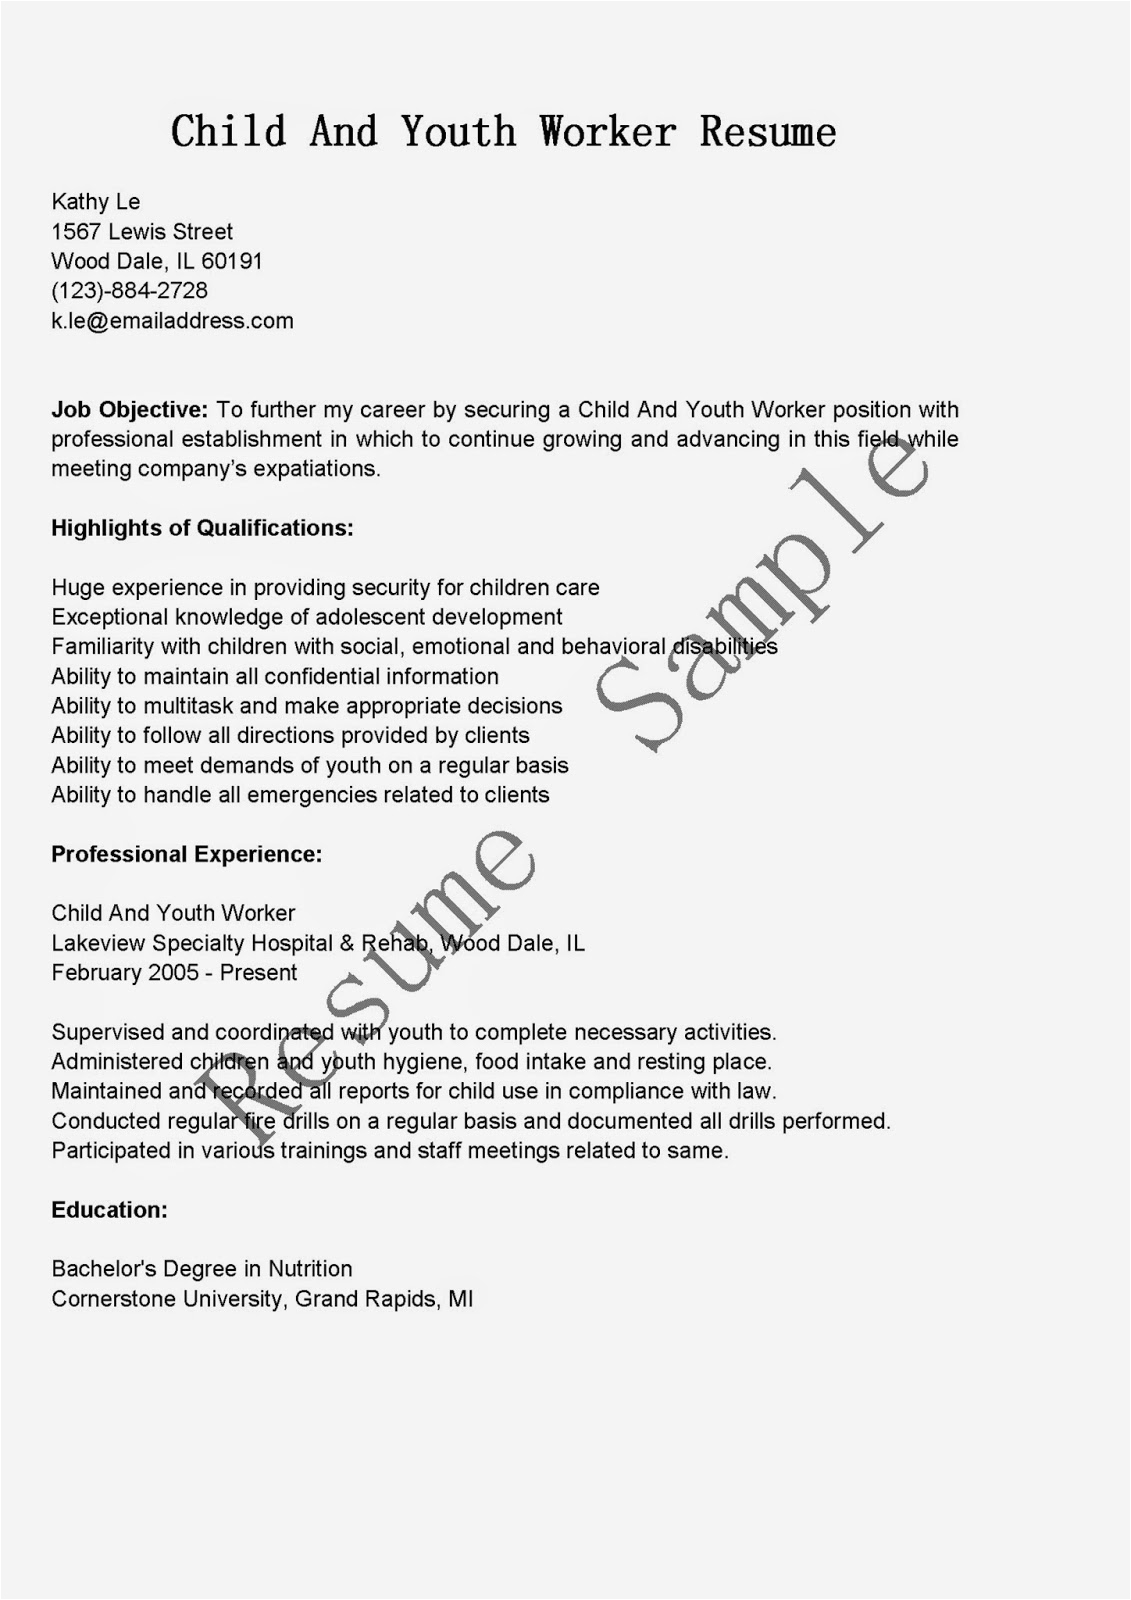 Child and Youth Worker Resume Samples Resume Samples Child and Youth Worker Resume Sample